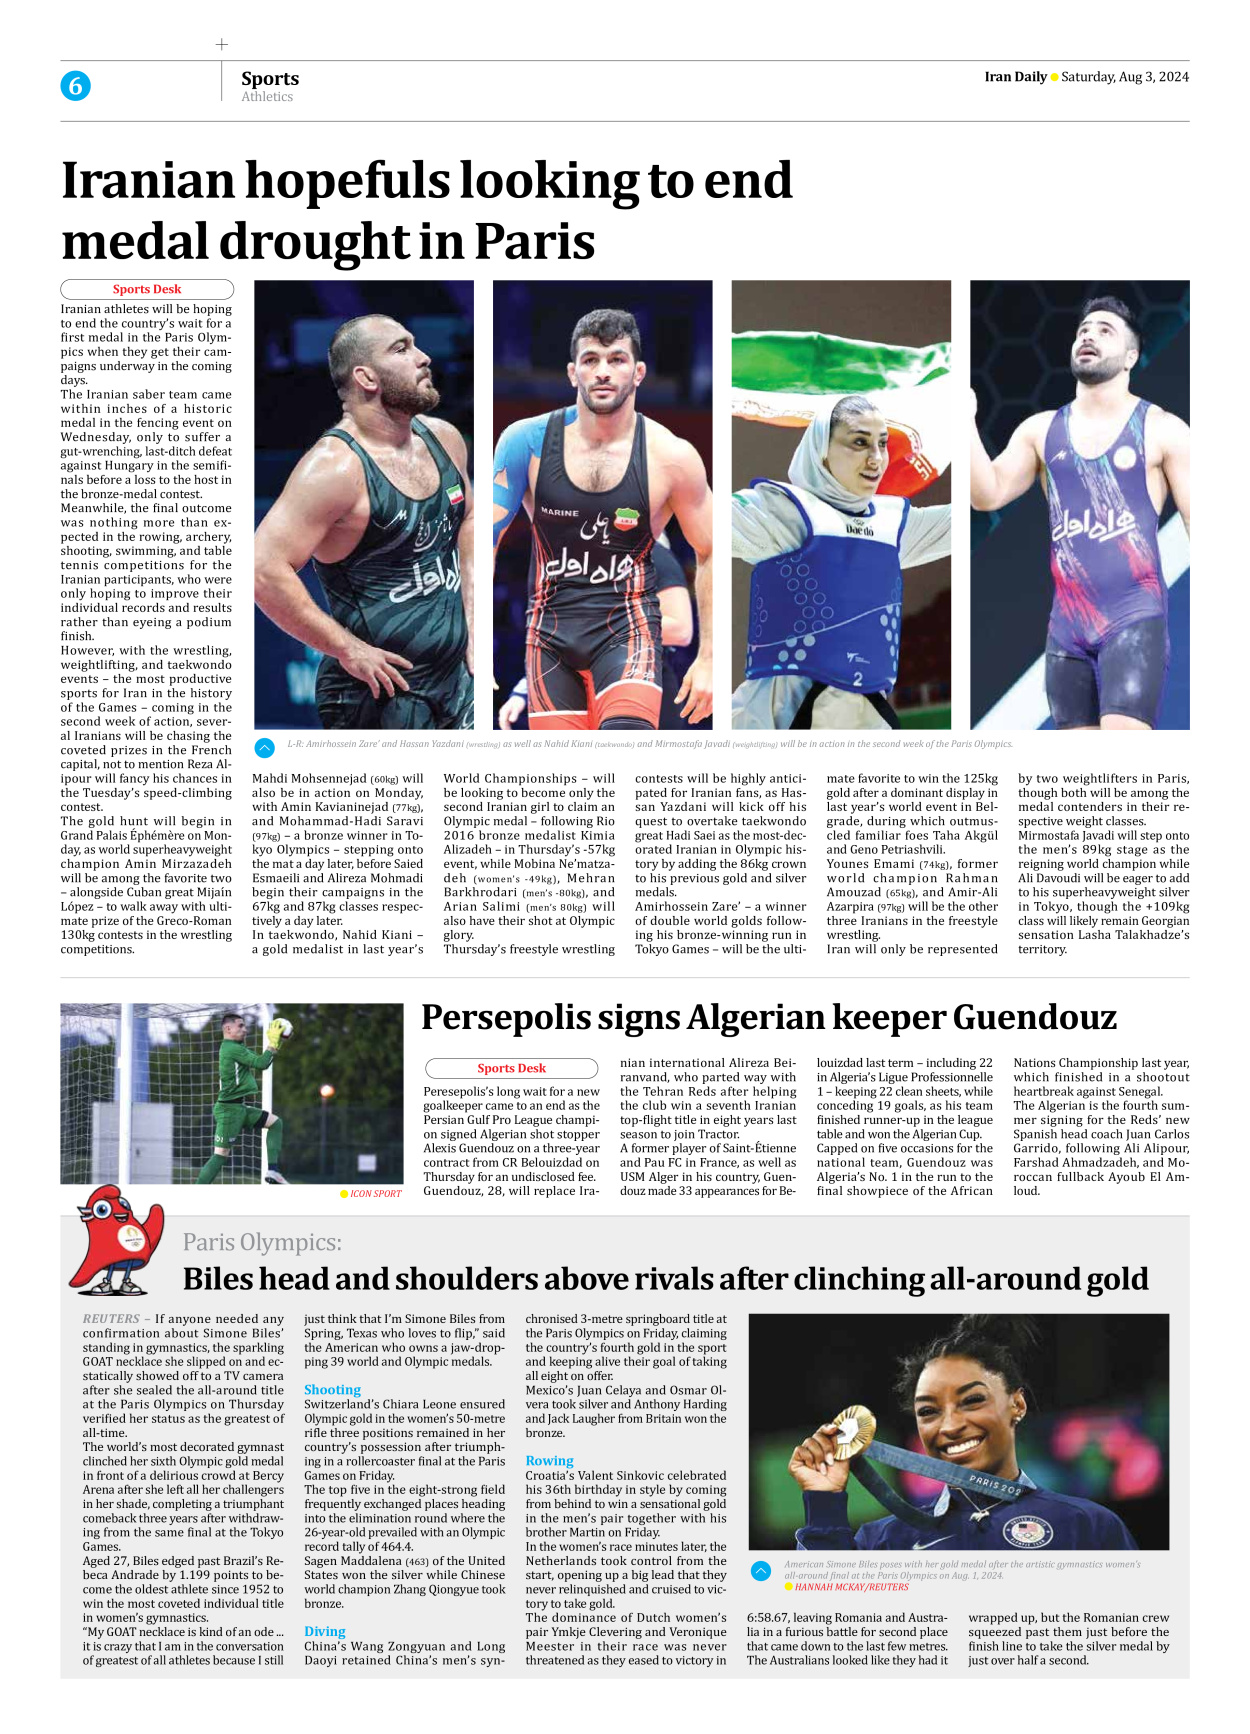 Iran Daily - Number Seven Thousand Six Hundred and Eighteen - 03 August 2024 - Page 6